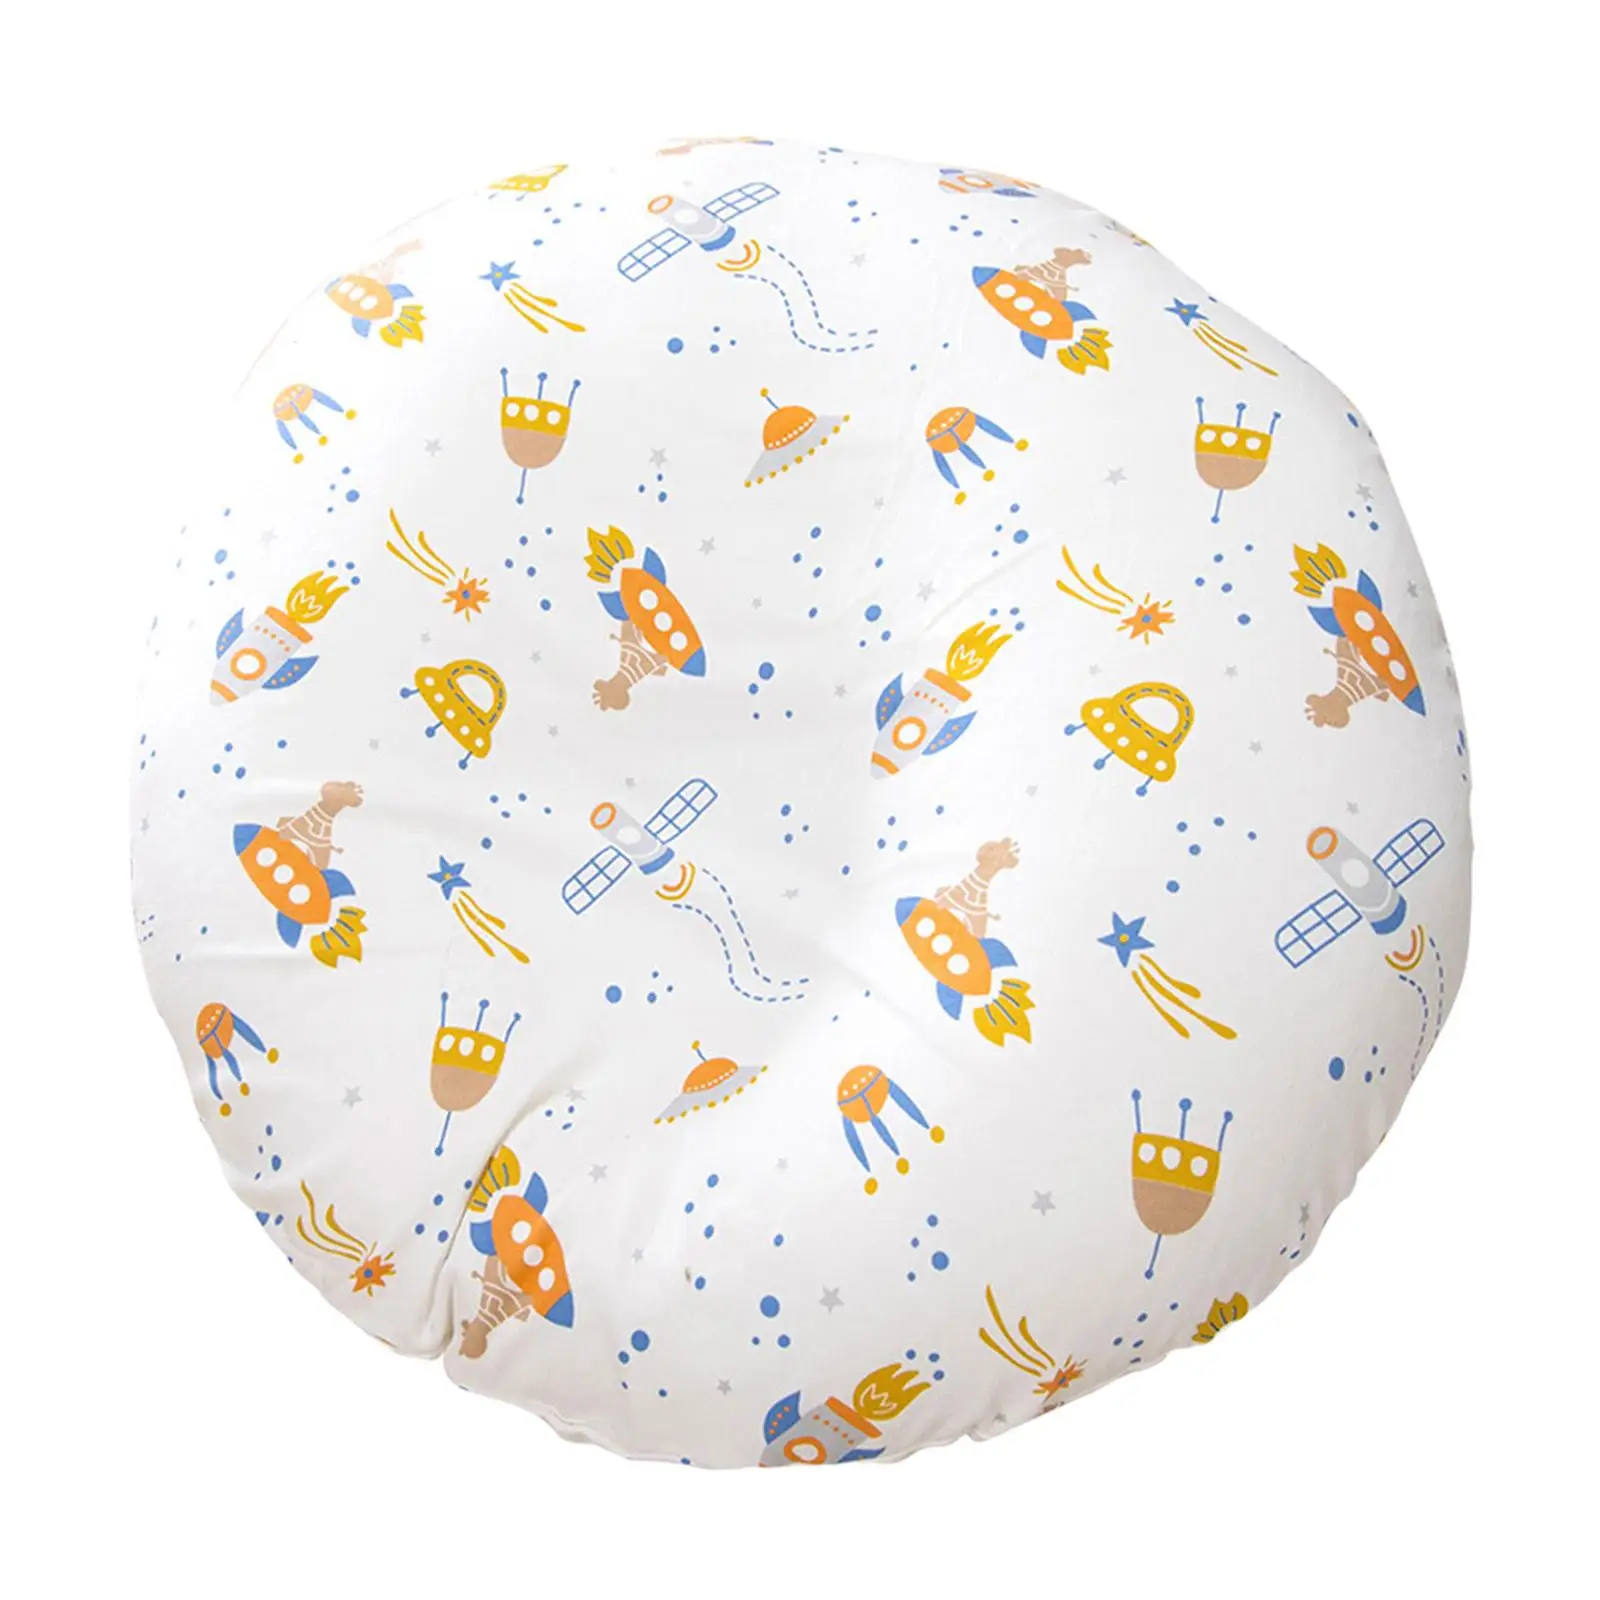 Infant Feeding Cushion with Washable Pillow Cover Infant Support Breast Feeding for Bottle Feeding Girls for New Moms